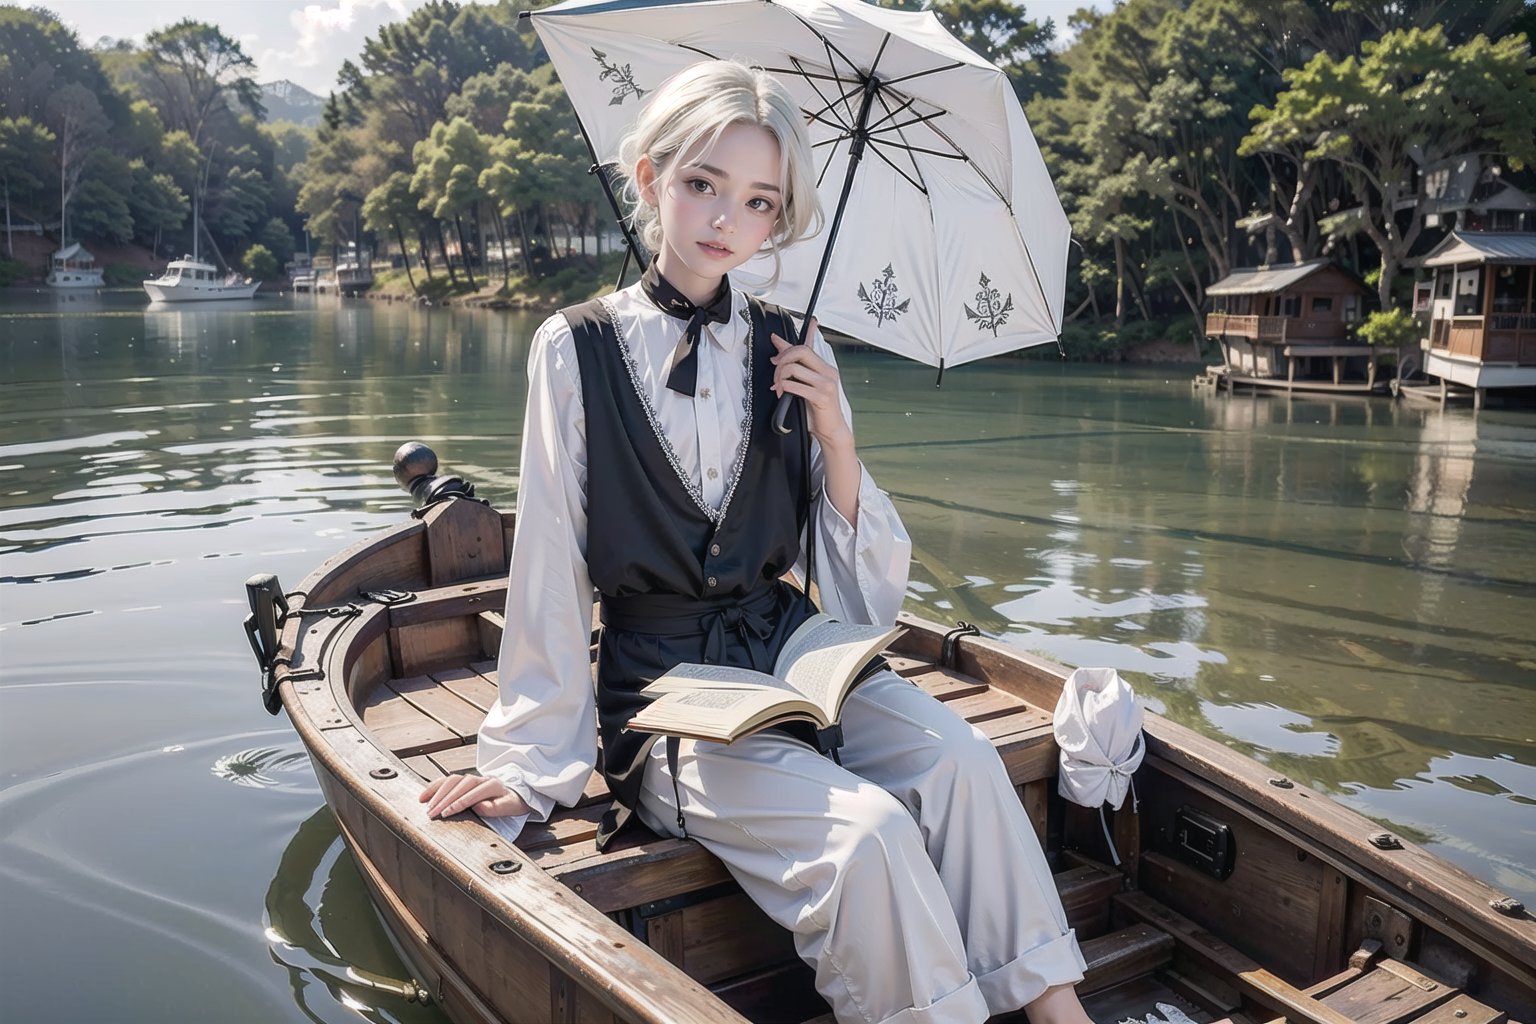 (1girl, black hair, black hair,  black dress,  hair bow ,jewelry, necklace, holding umbrella), 
(1boy, white hair, holding book, book, reading, white shirt, white trousers,) 
(((1 boy 1 girl)), sitting in boat, boat on water), realistic, watercraft, trees,flowers